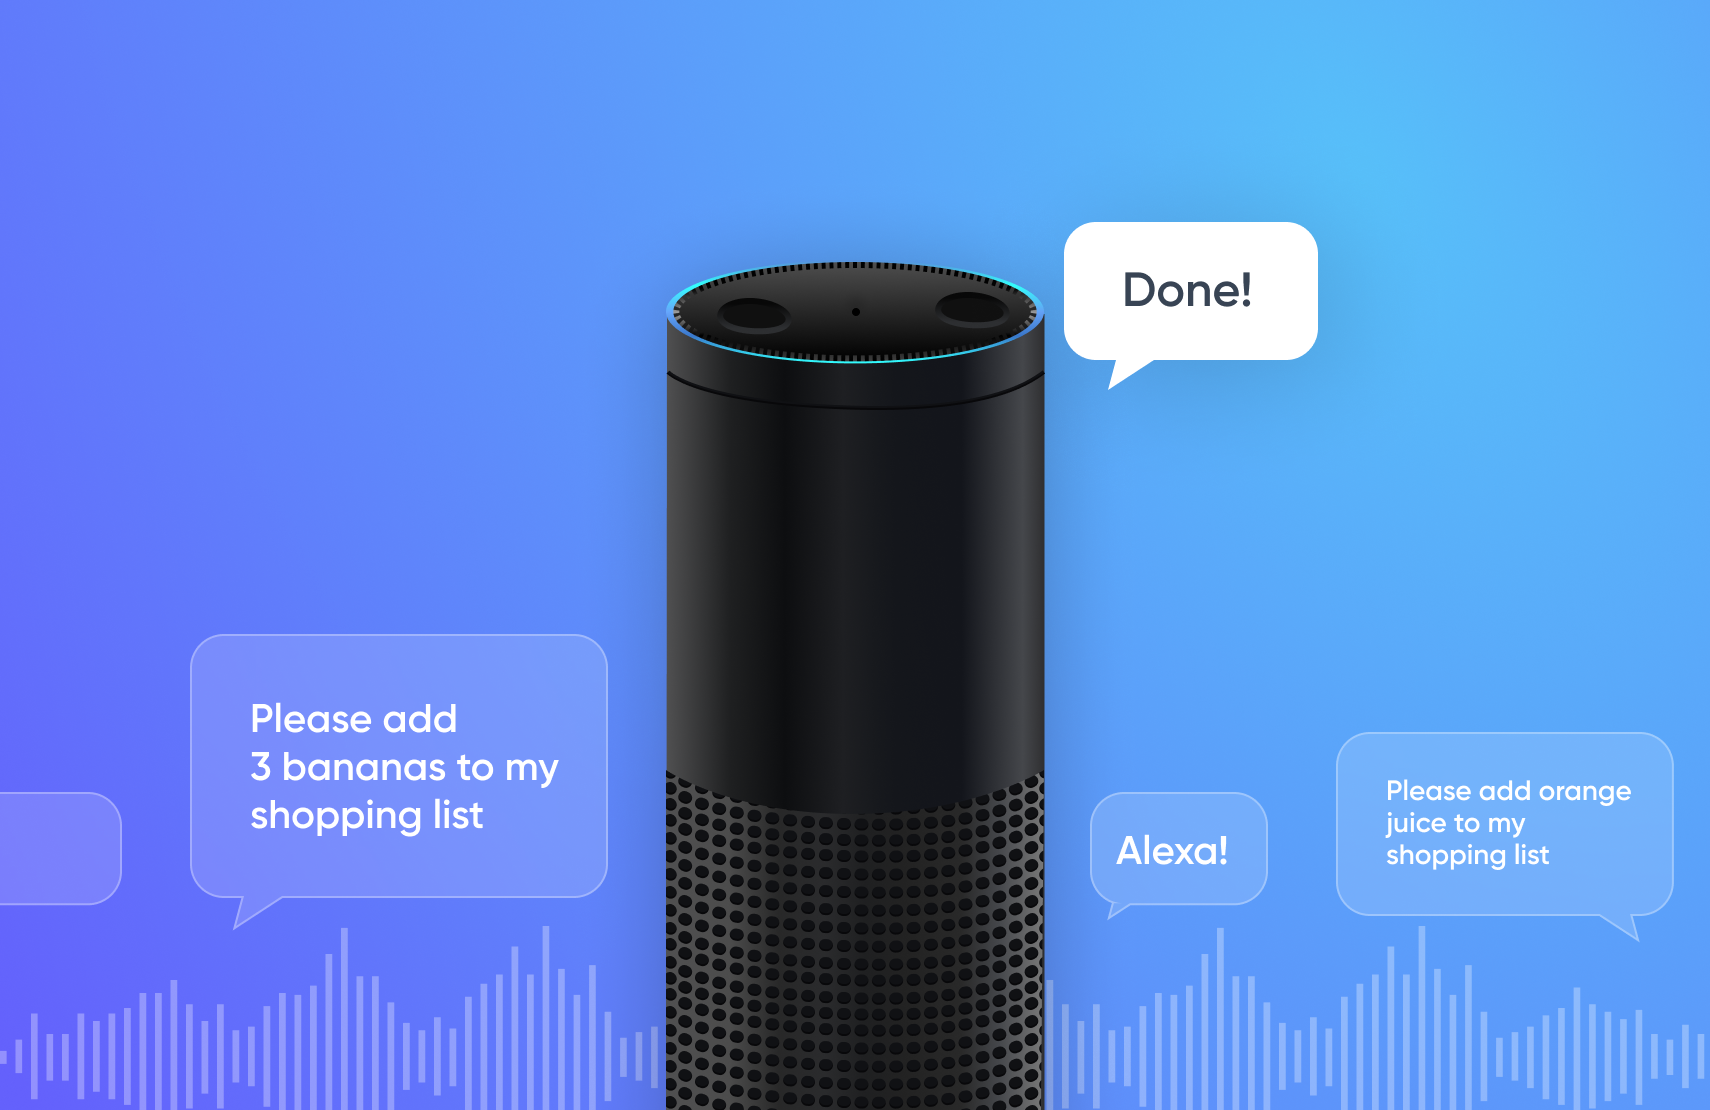 How Does Voice Commerce Help Brands Grow?